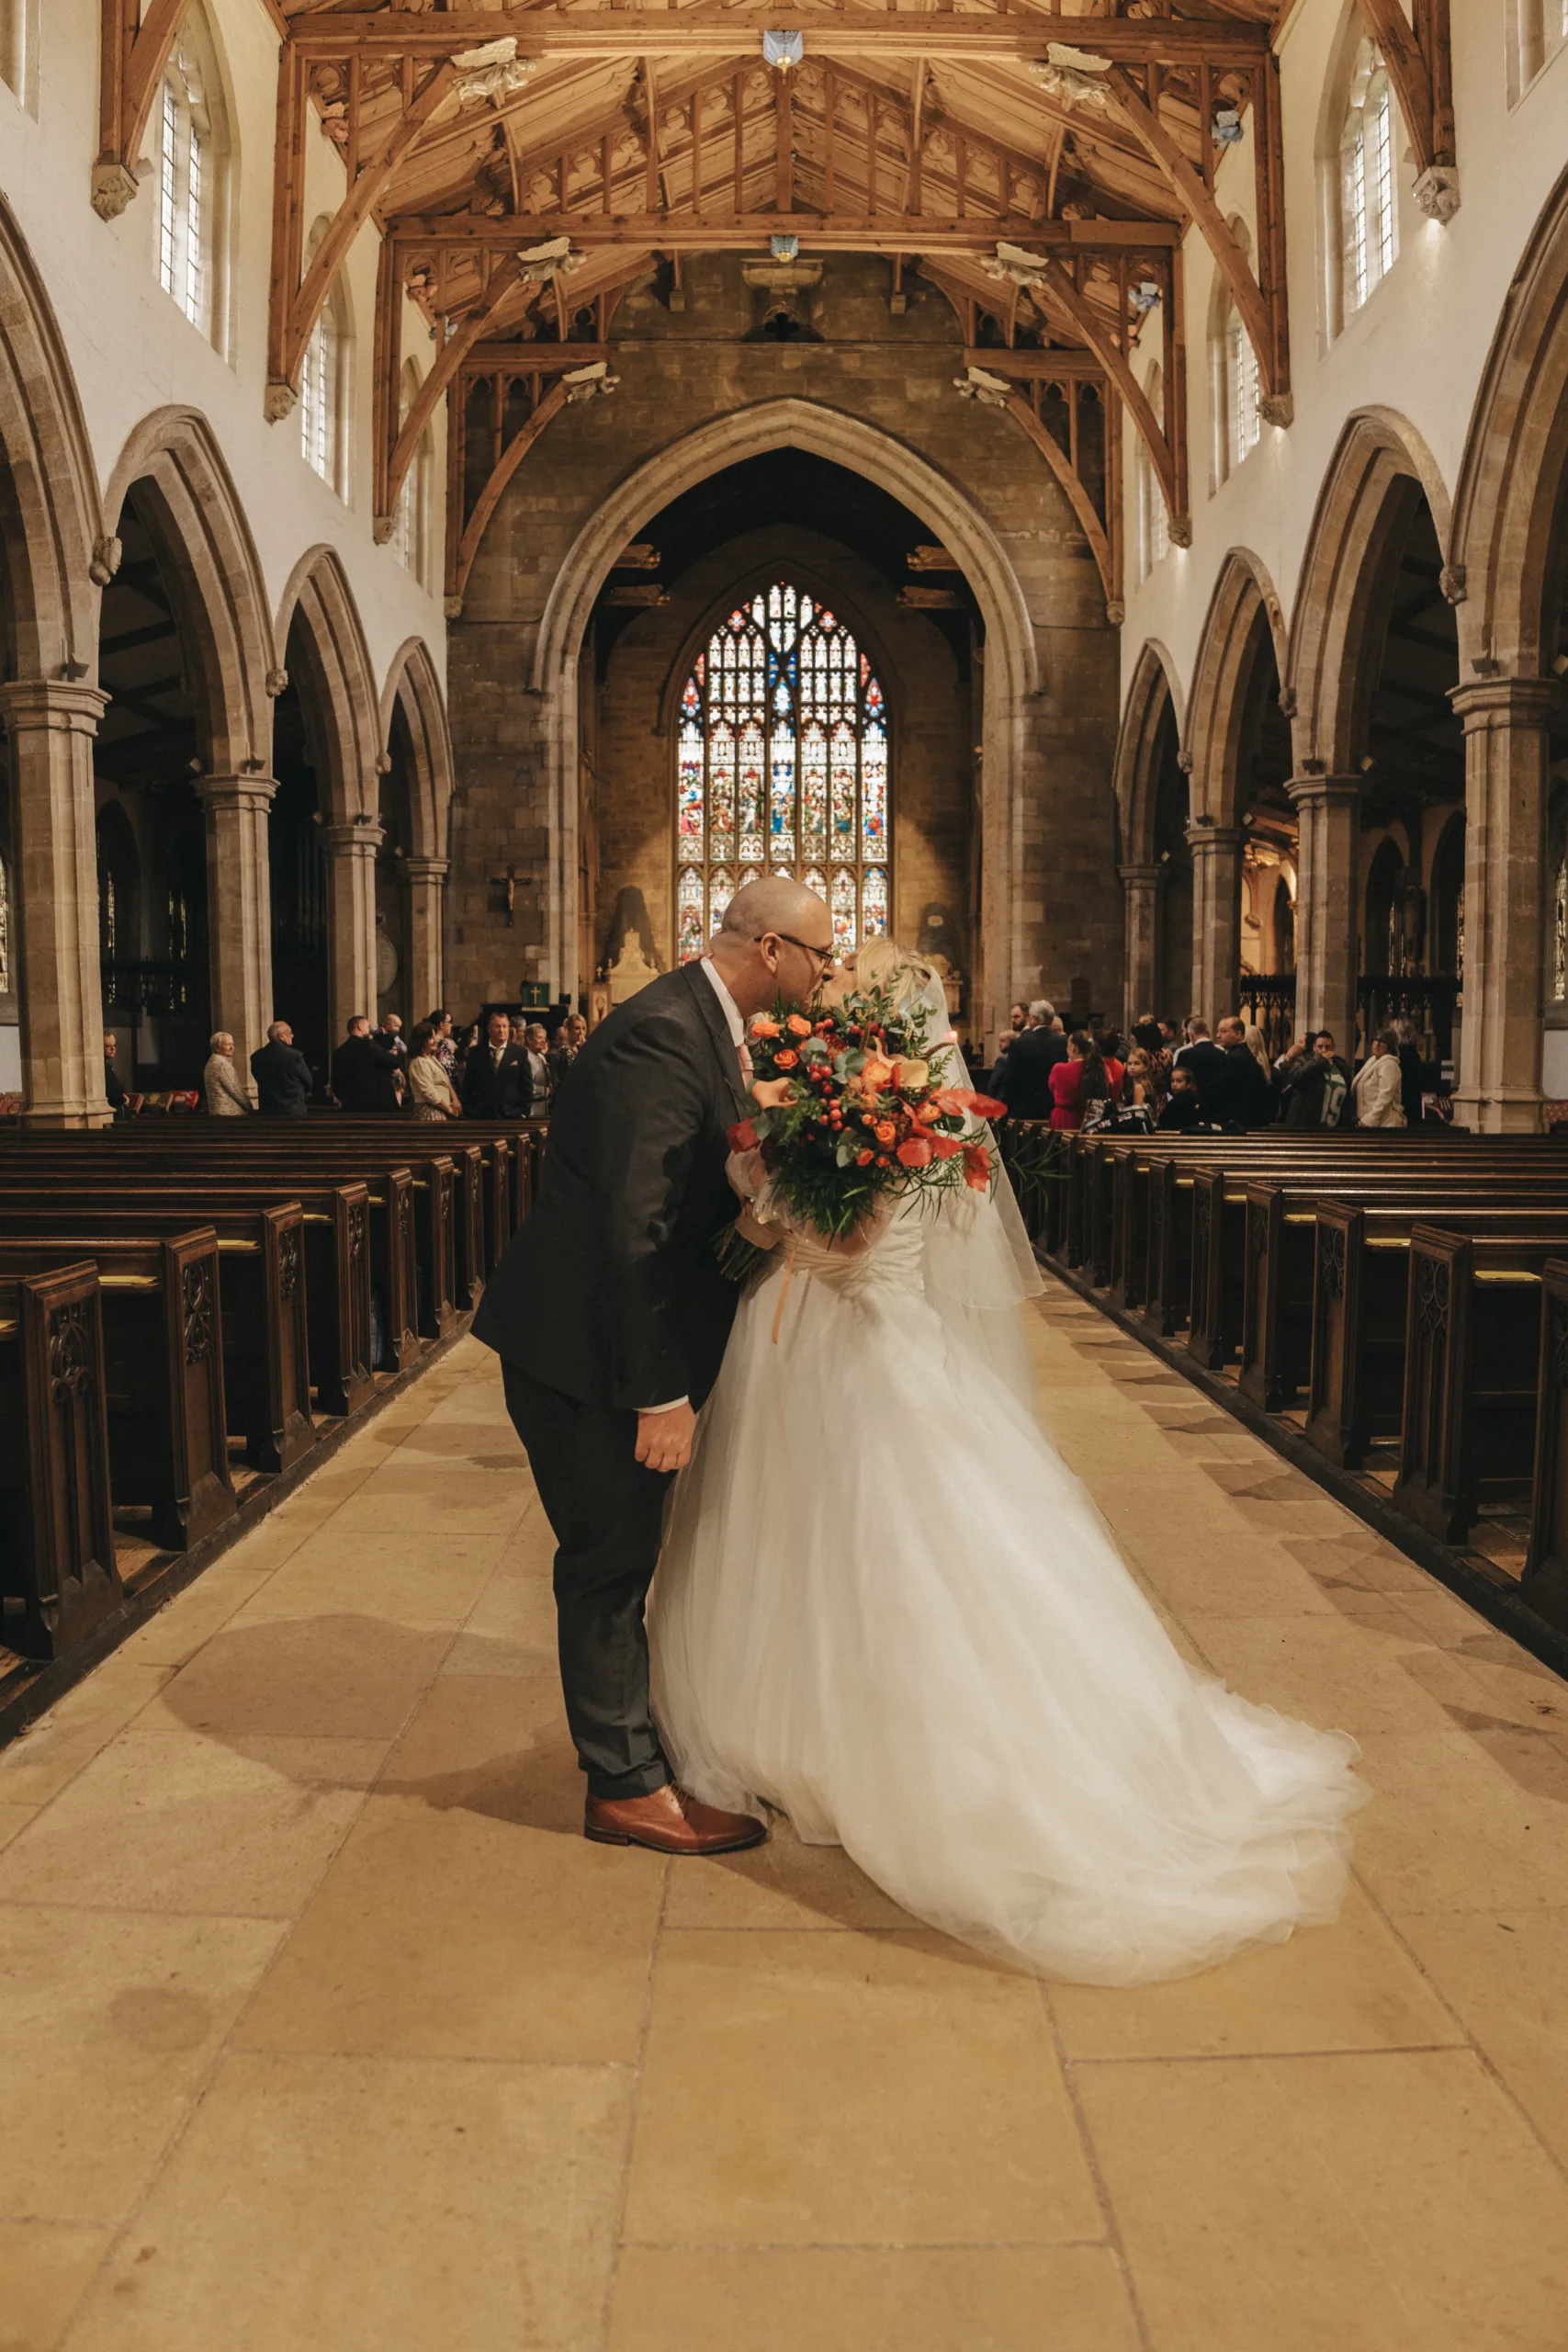 A bride and groom kissing in a Yorkshire church.